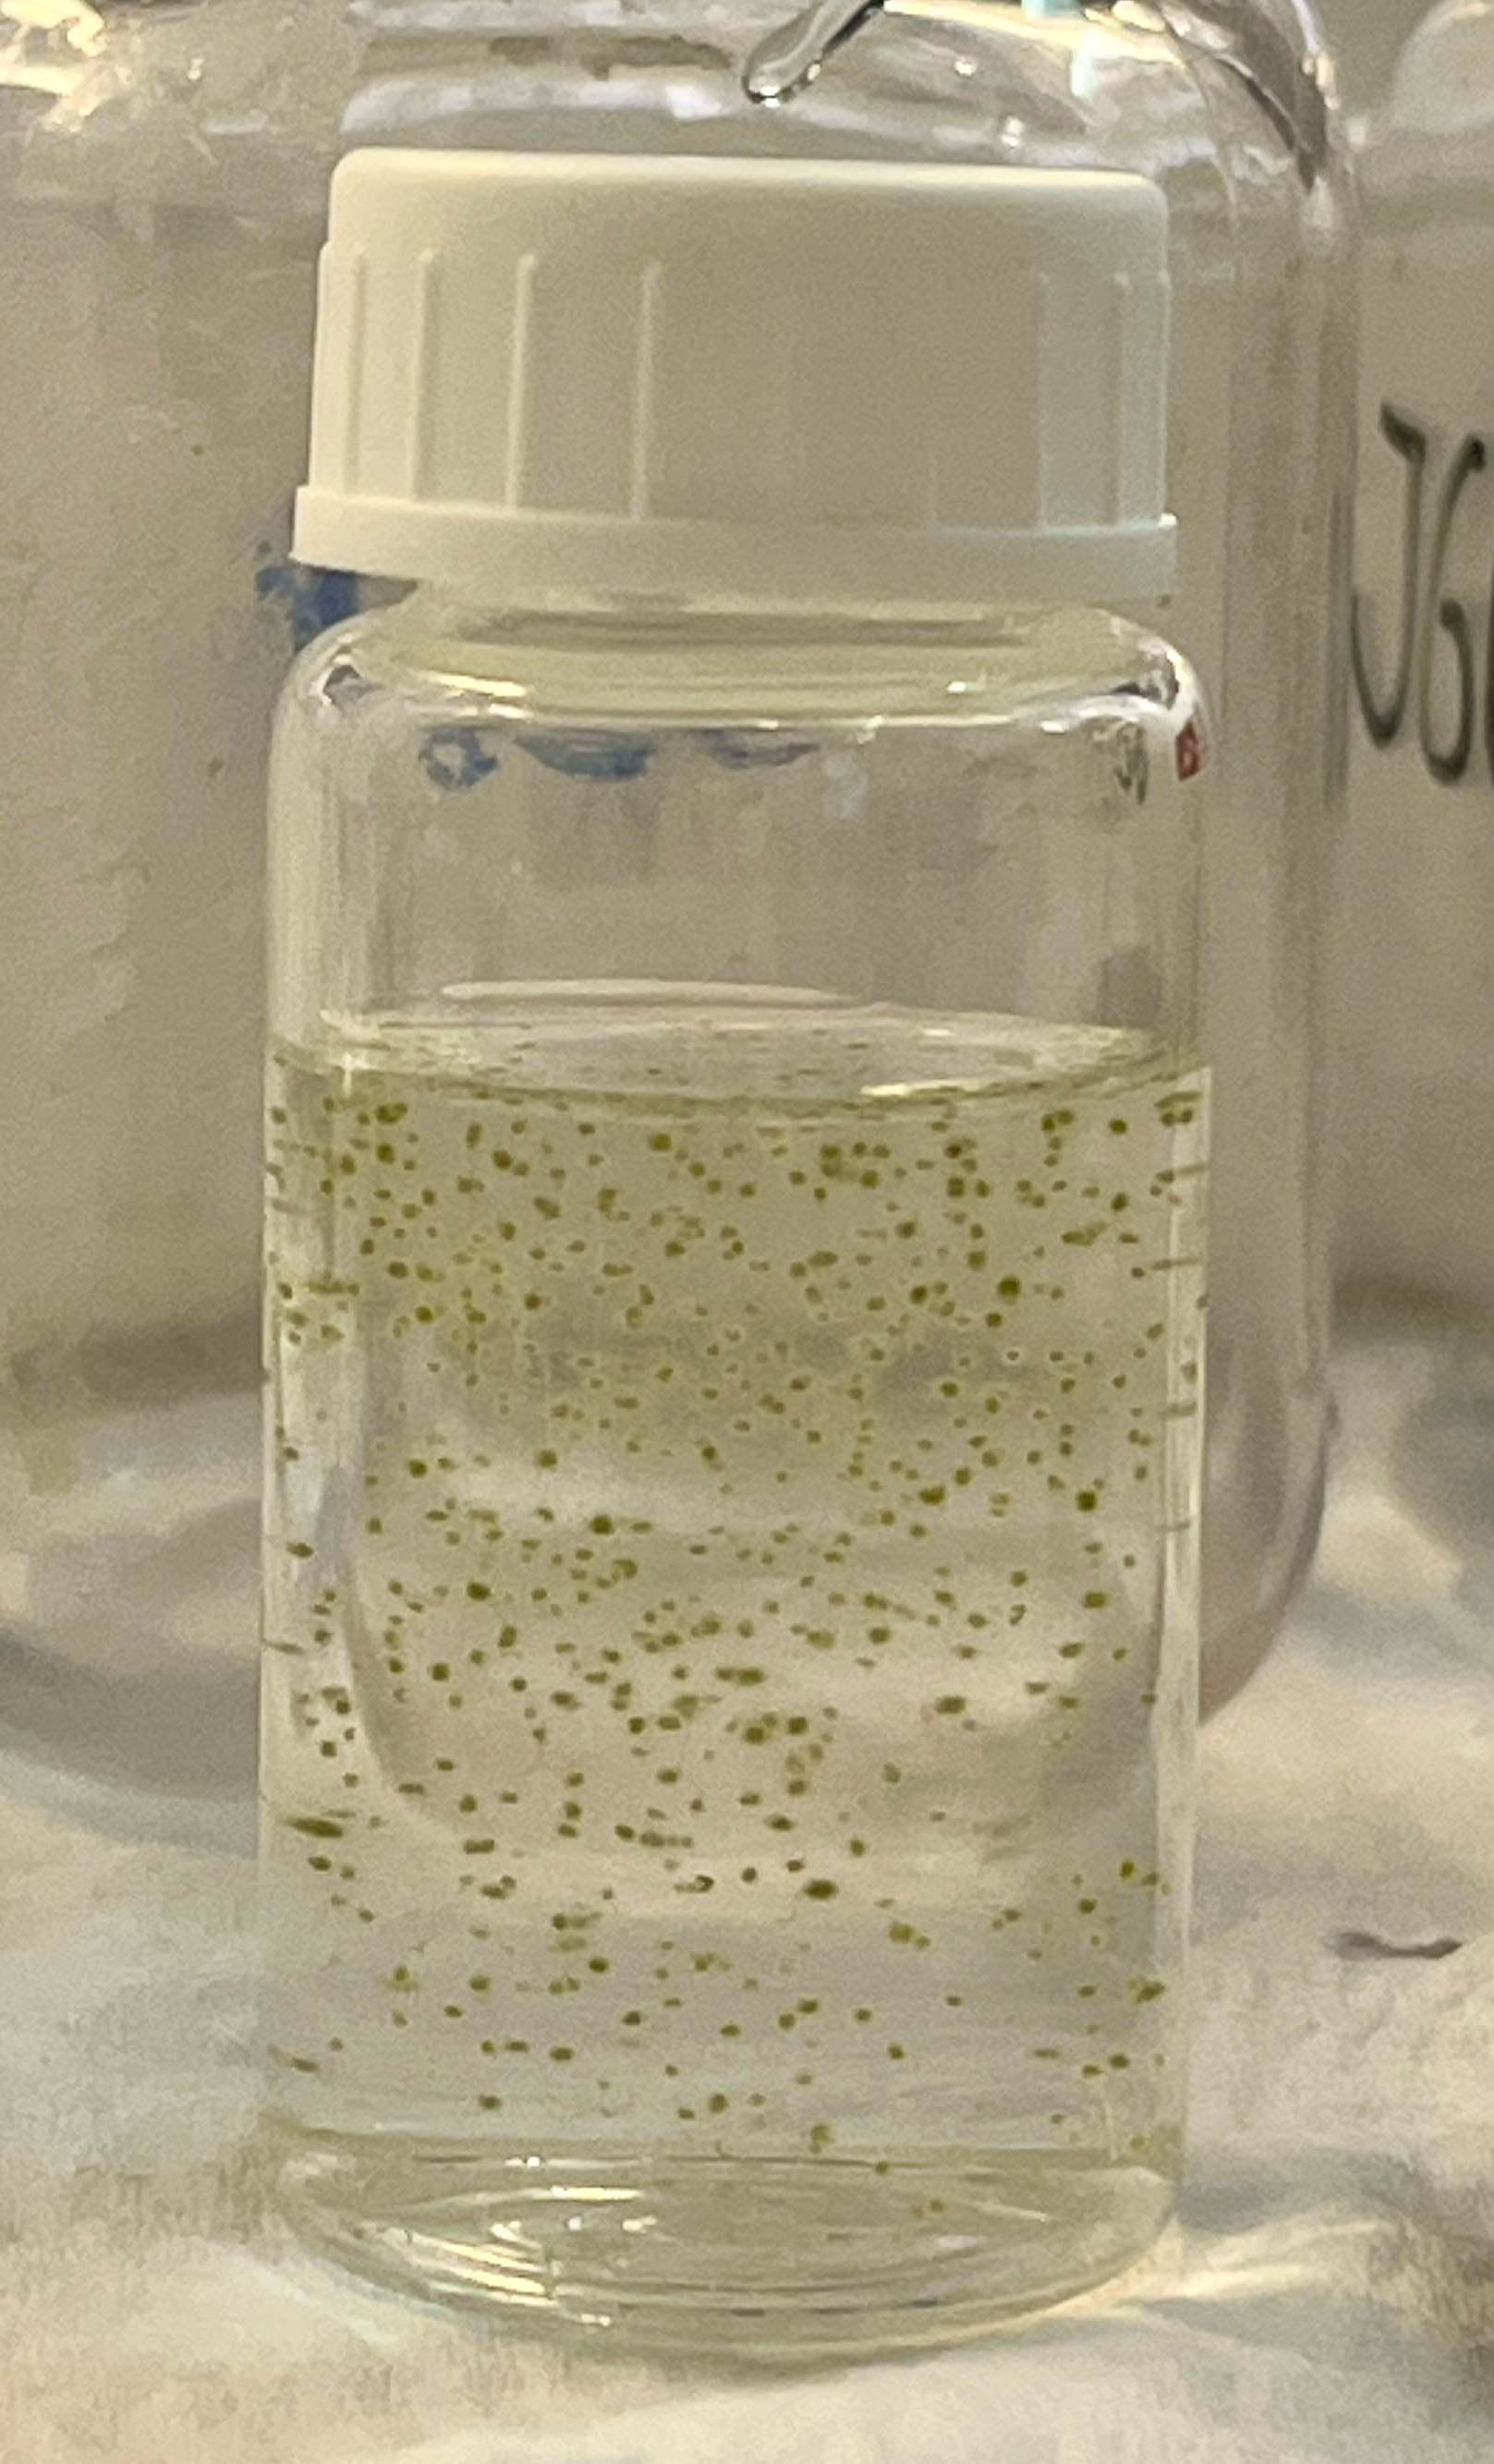 During the experiment clear differences were observed in the abundance of Gloetrichica echinulata colonies, which is a cyanobacterium that blooms in Erken during summer. Photographer: Matilda Andersson